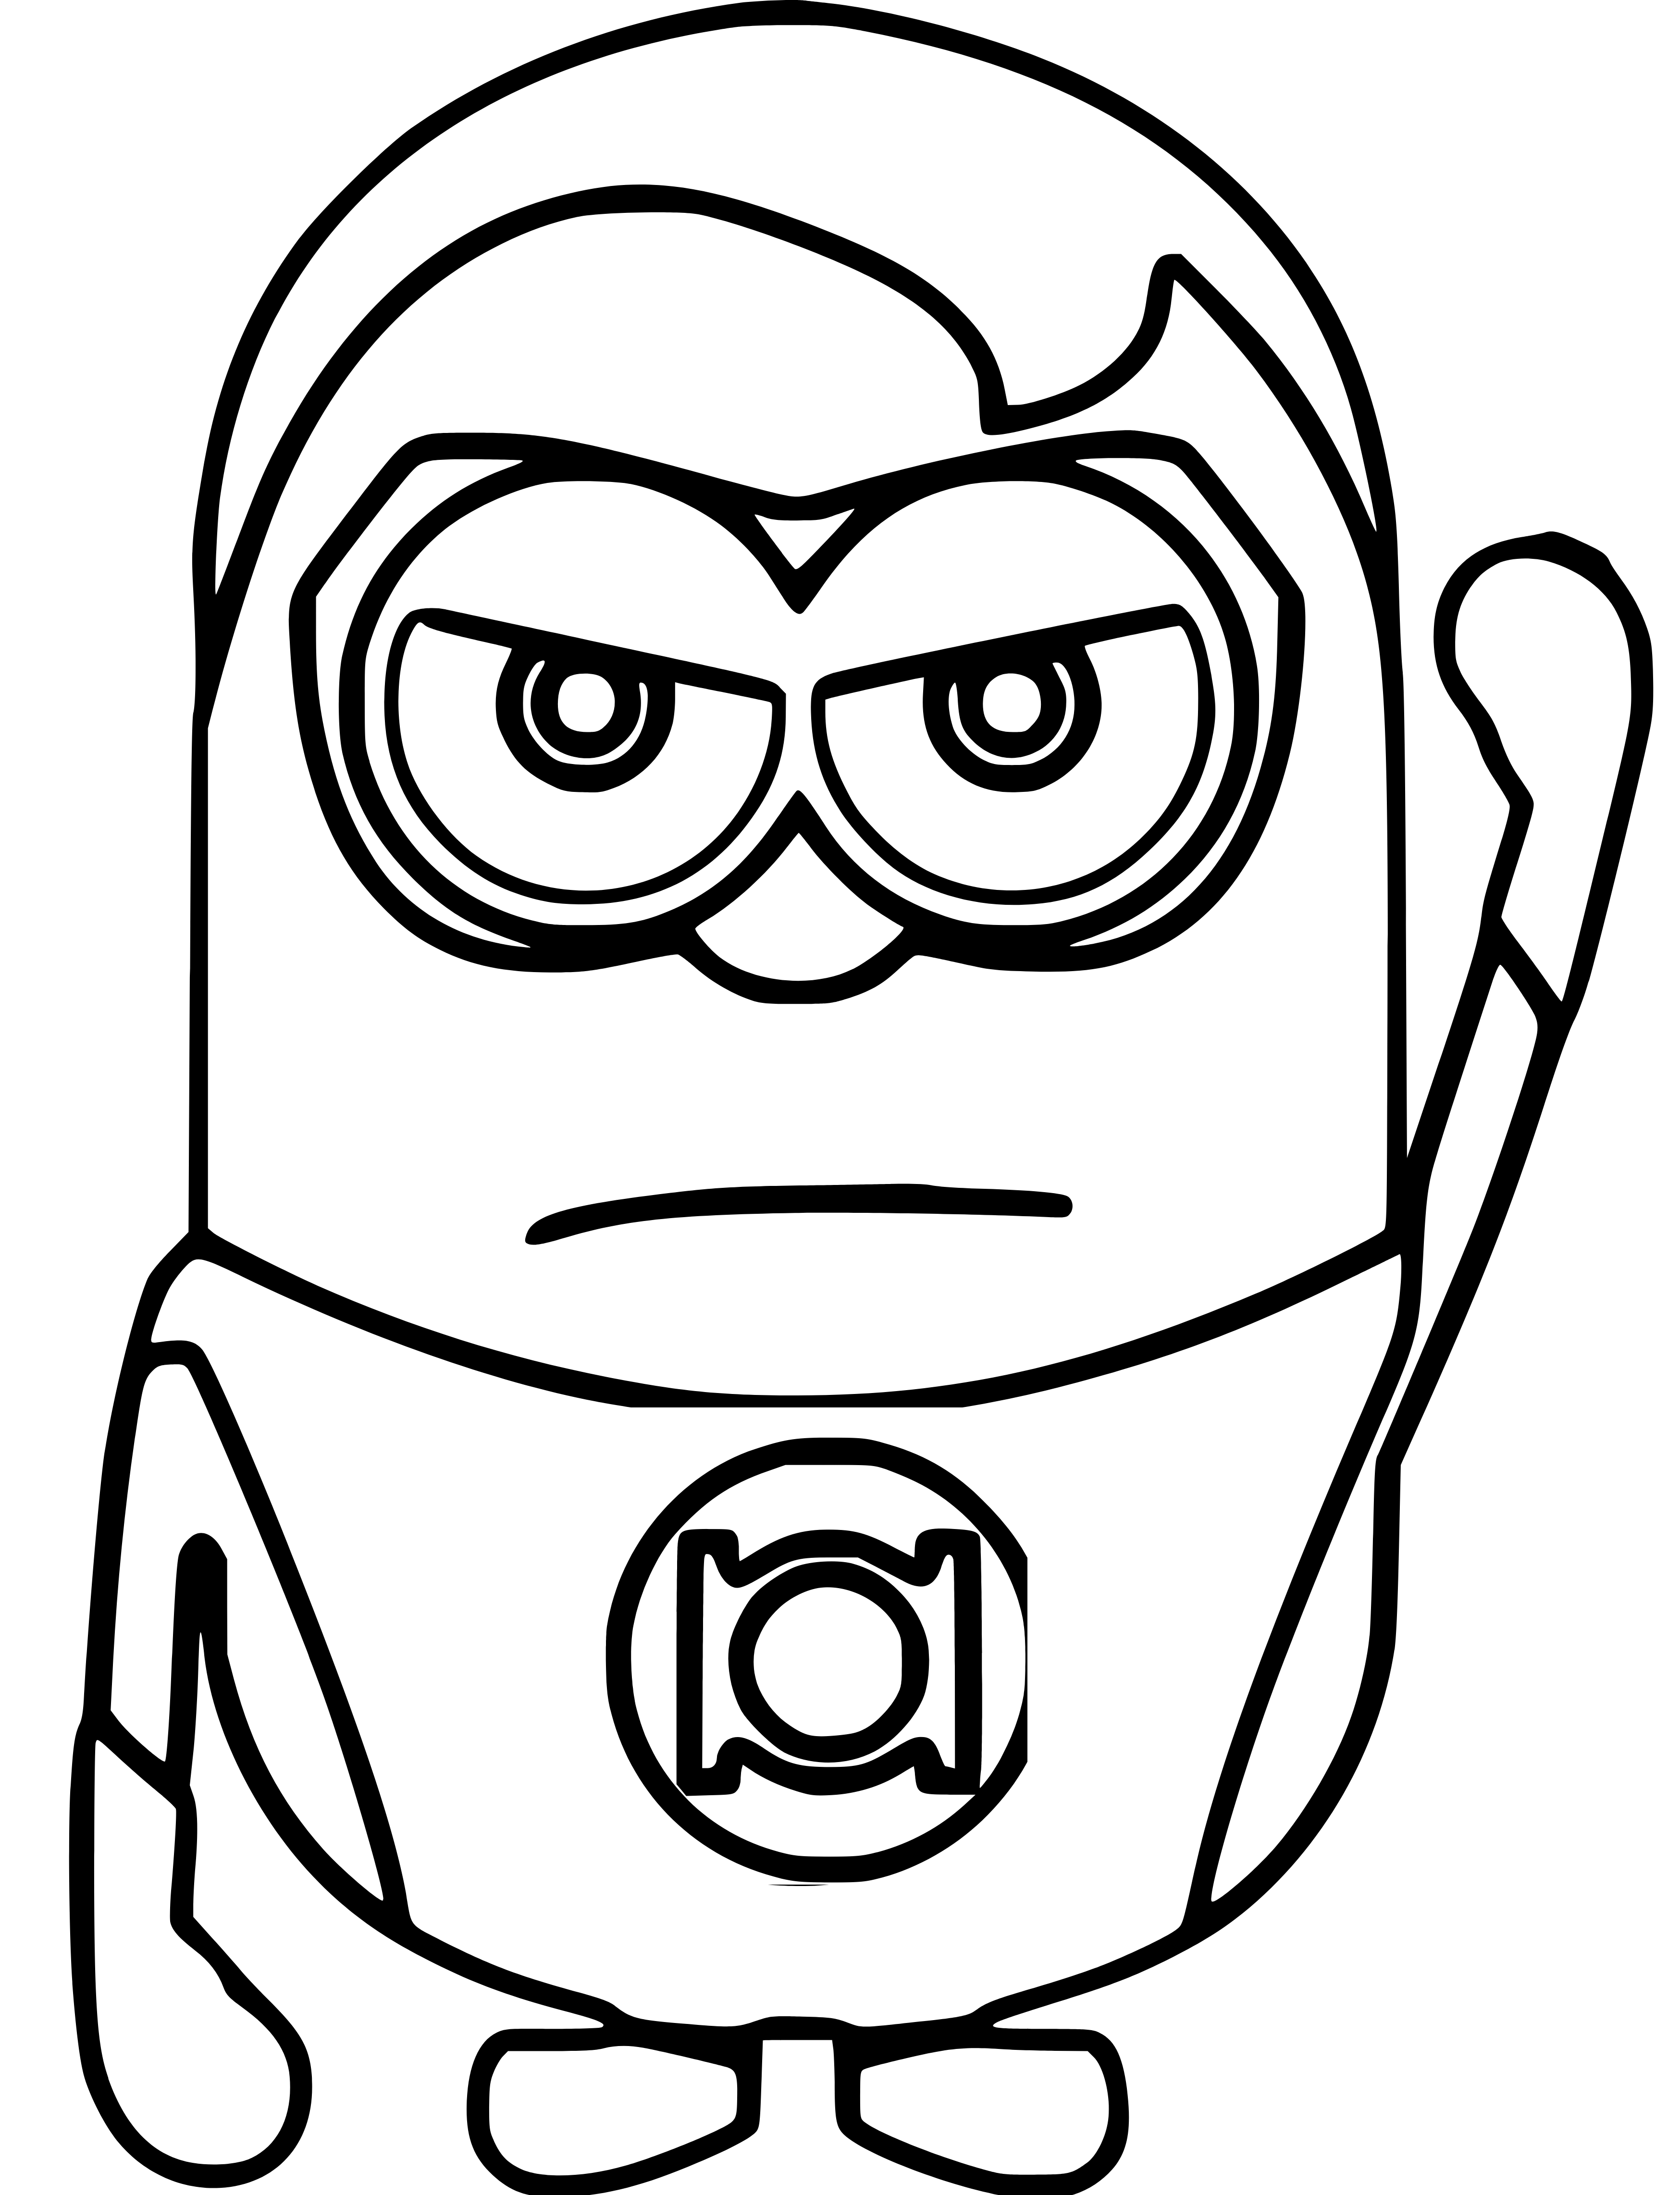 Minion as Superheroes drawing page to color - SheetalColor.com